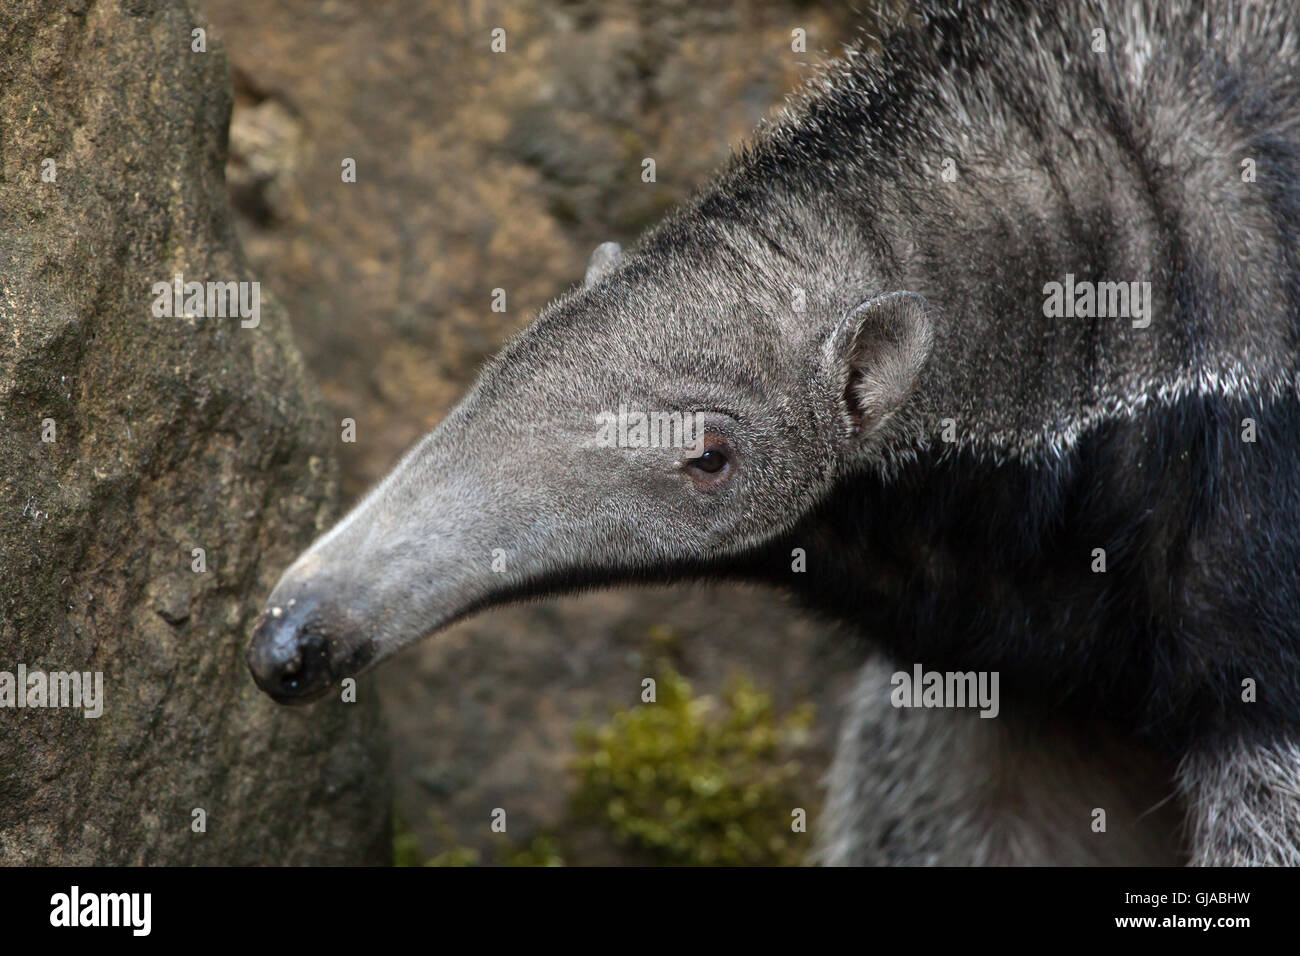 Giant anteater (Myrmecophaga tridactyla), noto anche come l'orso ant. Foto Stock